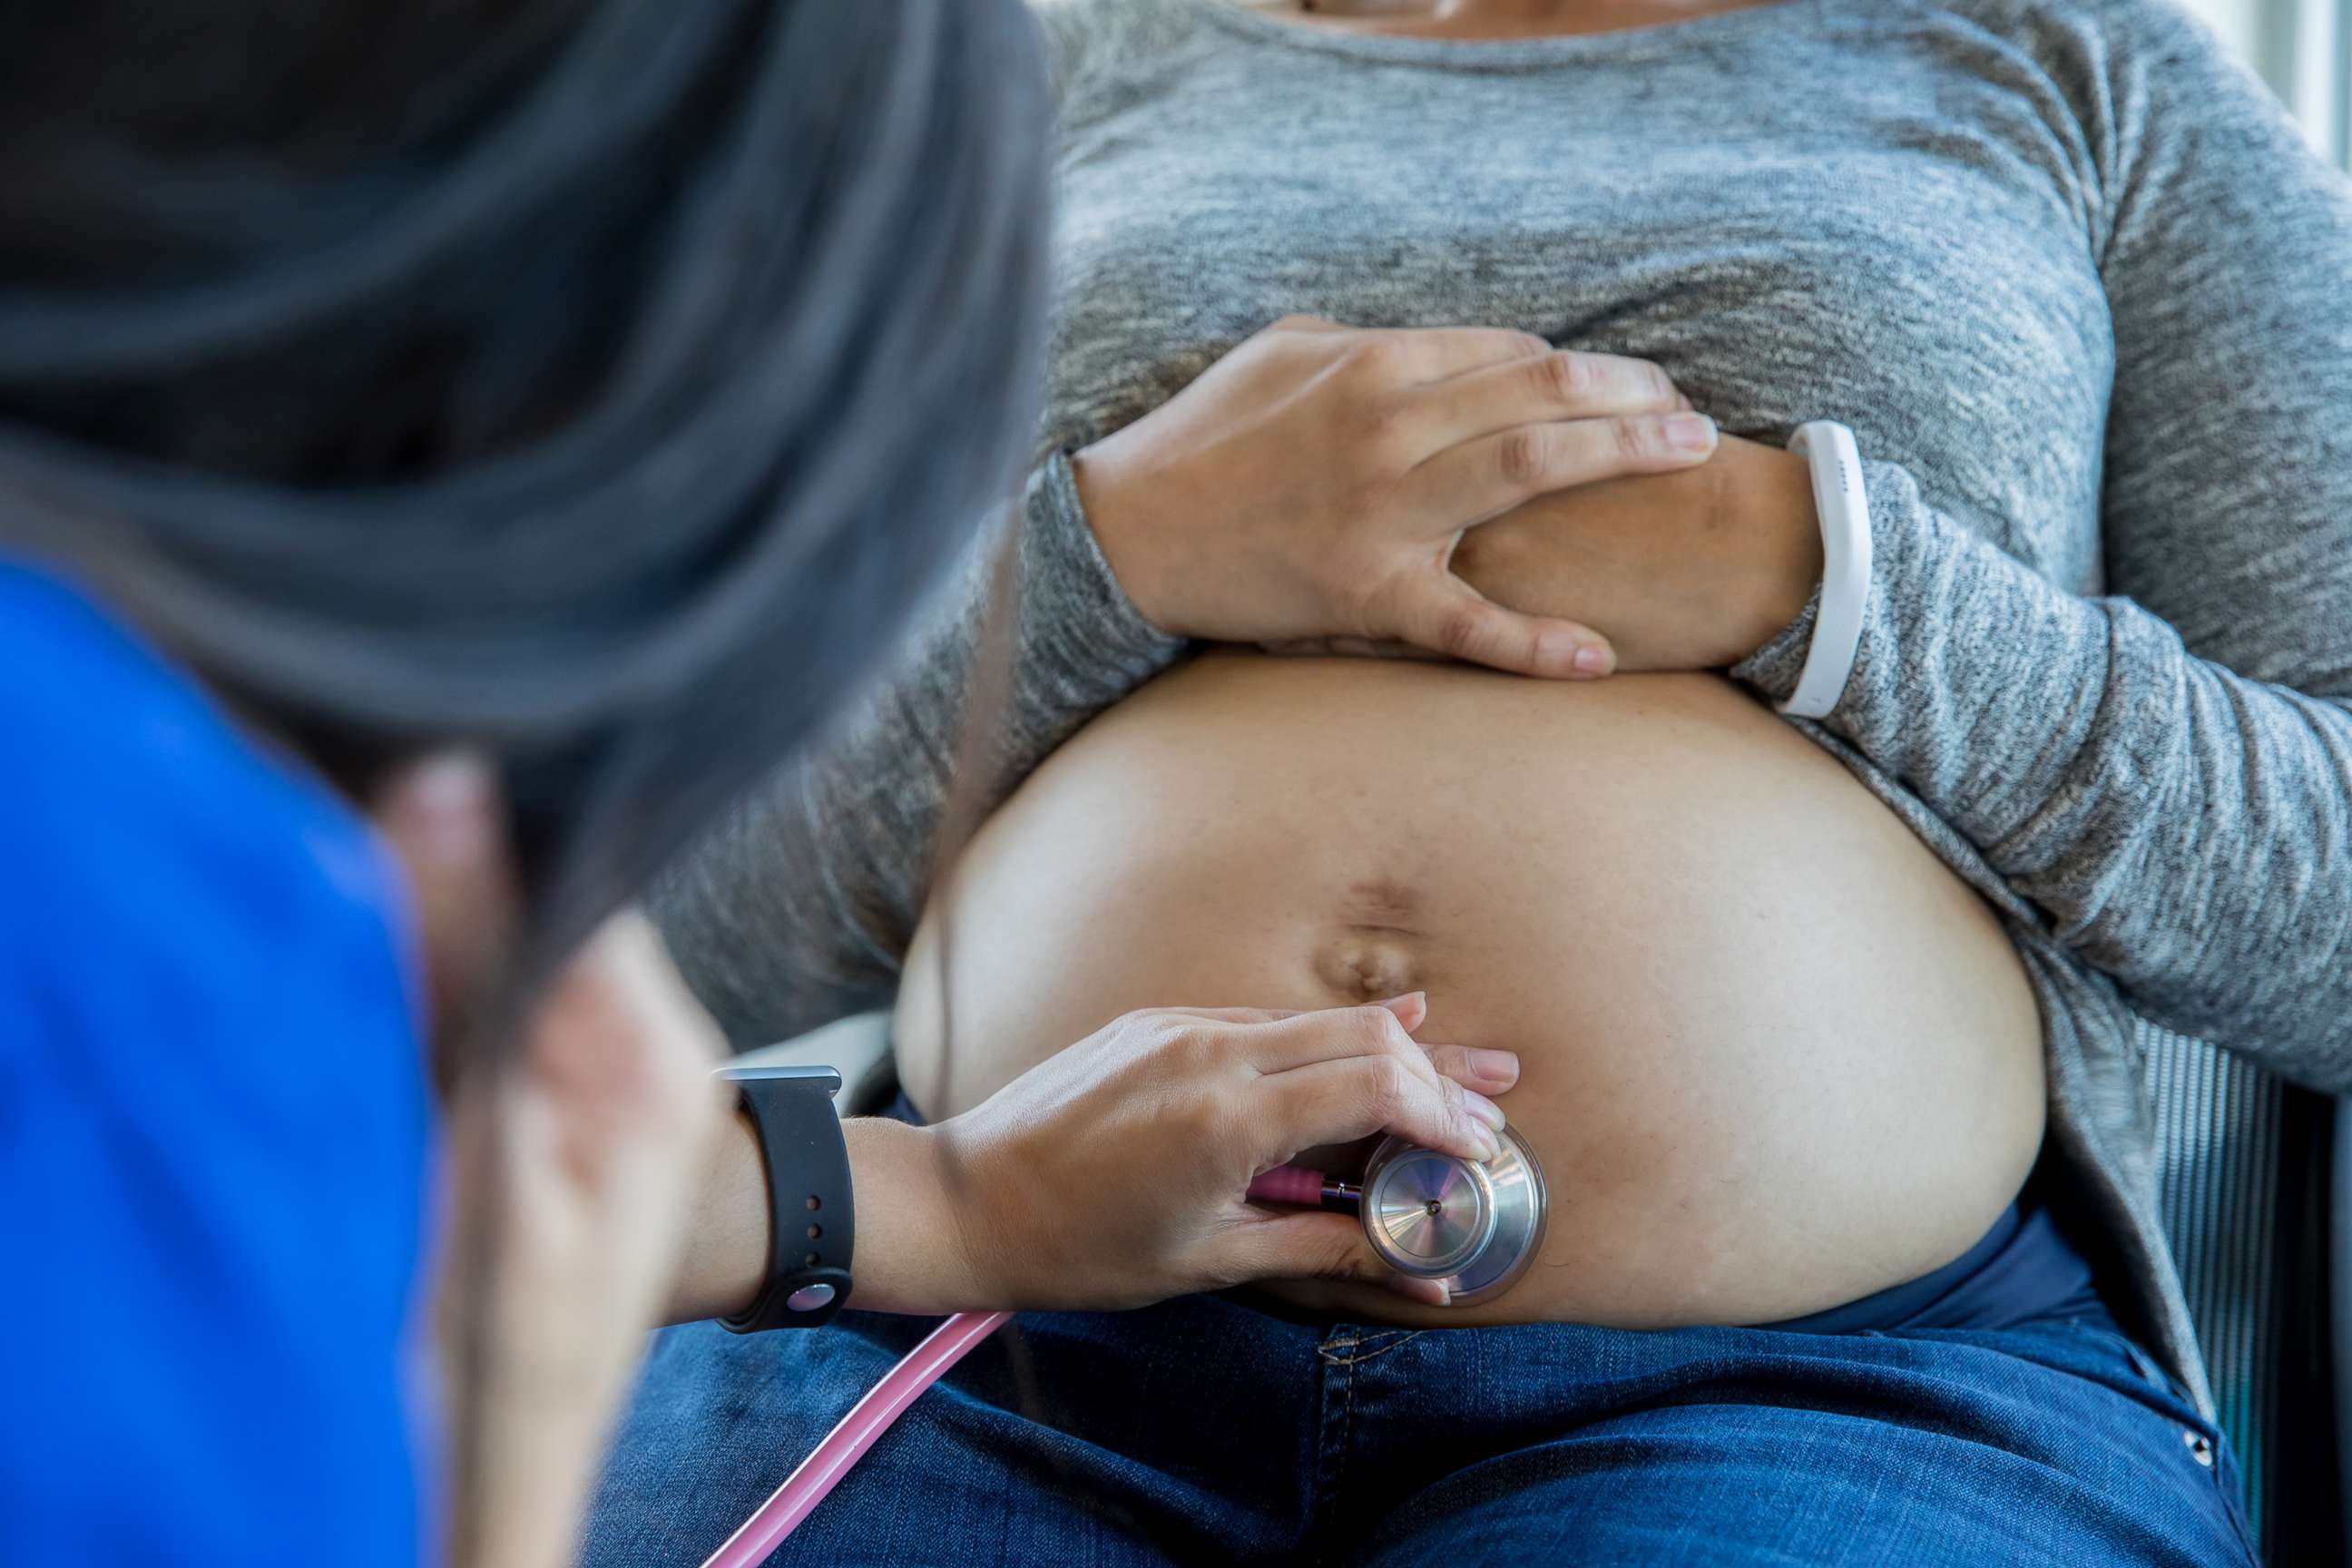 PHOTO: An undated stock photo depicts a pregnant woman undergoing a prenatal exam.